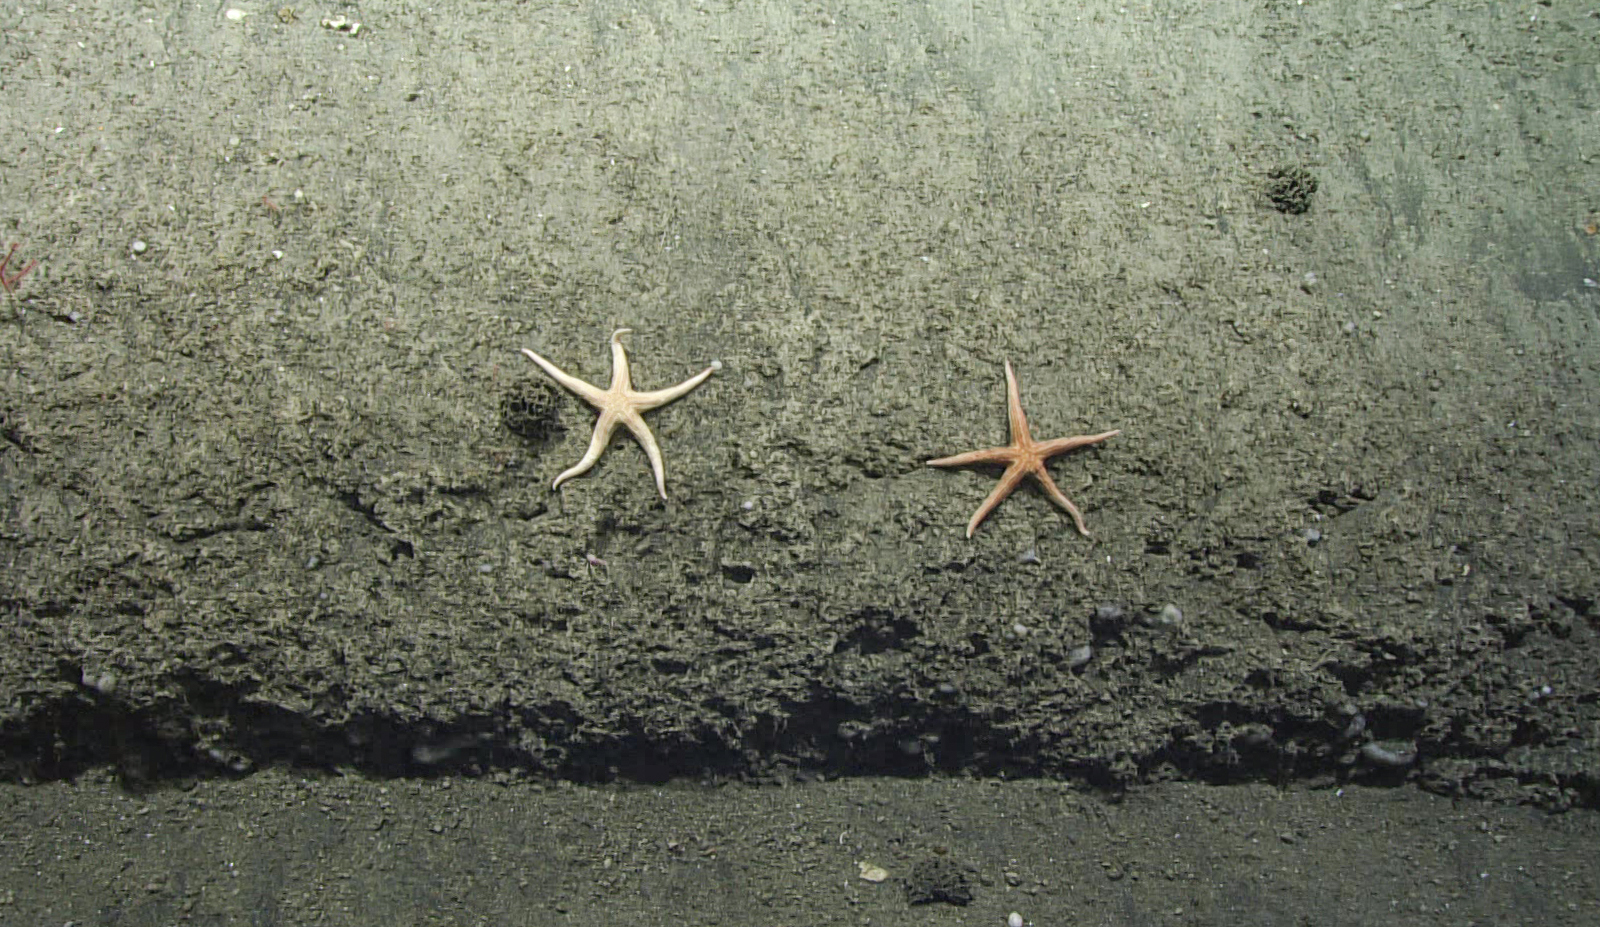 Deep Connections 2019: Exploring Atlantic Canyons and Seamounts